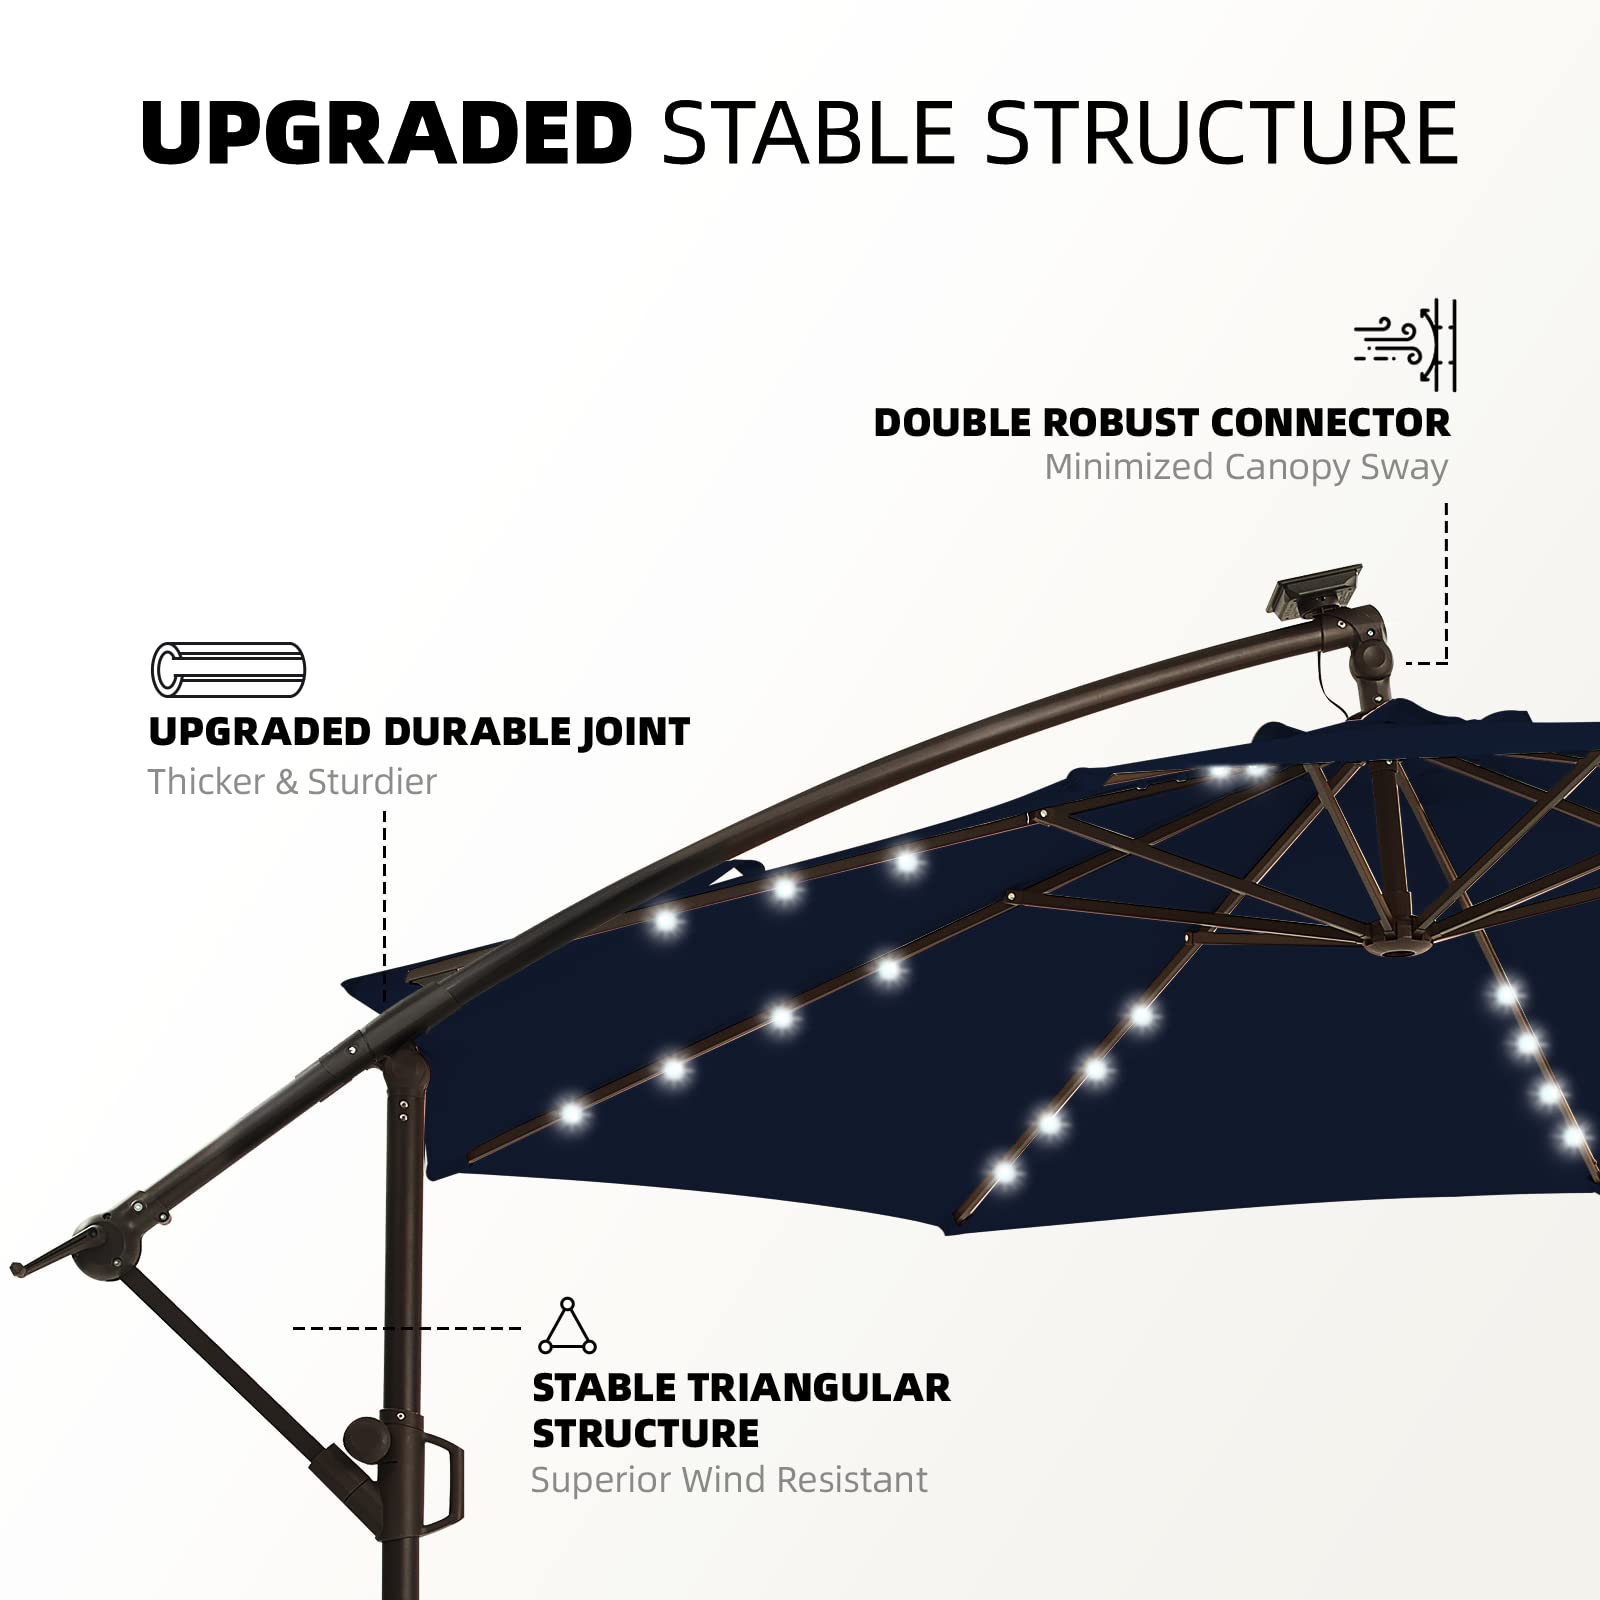 10FT Solar LED Patio Cantilever Umbrella With Crank and Weighted Base